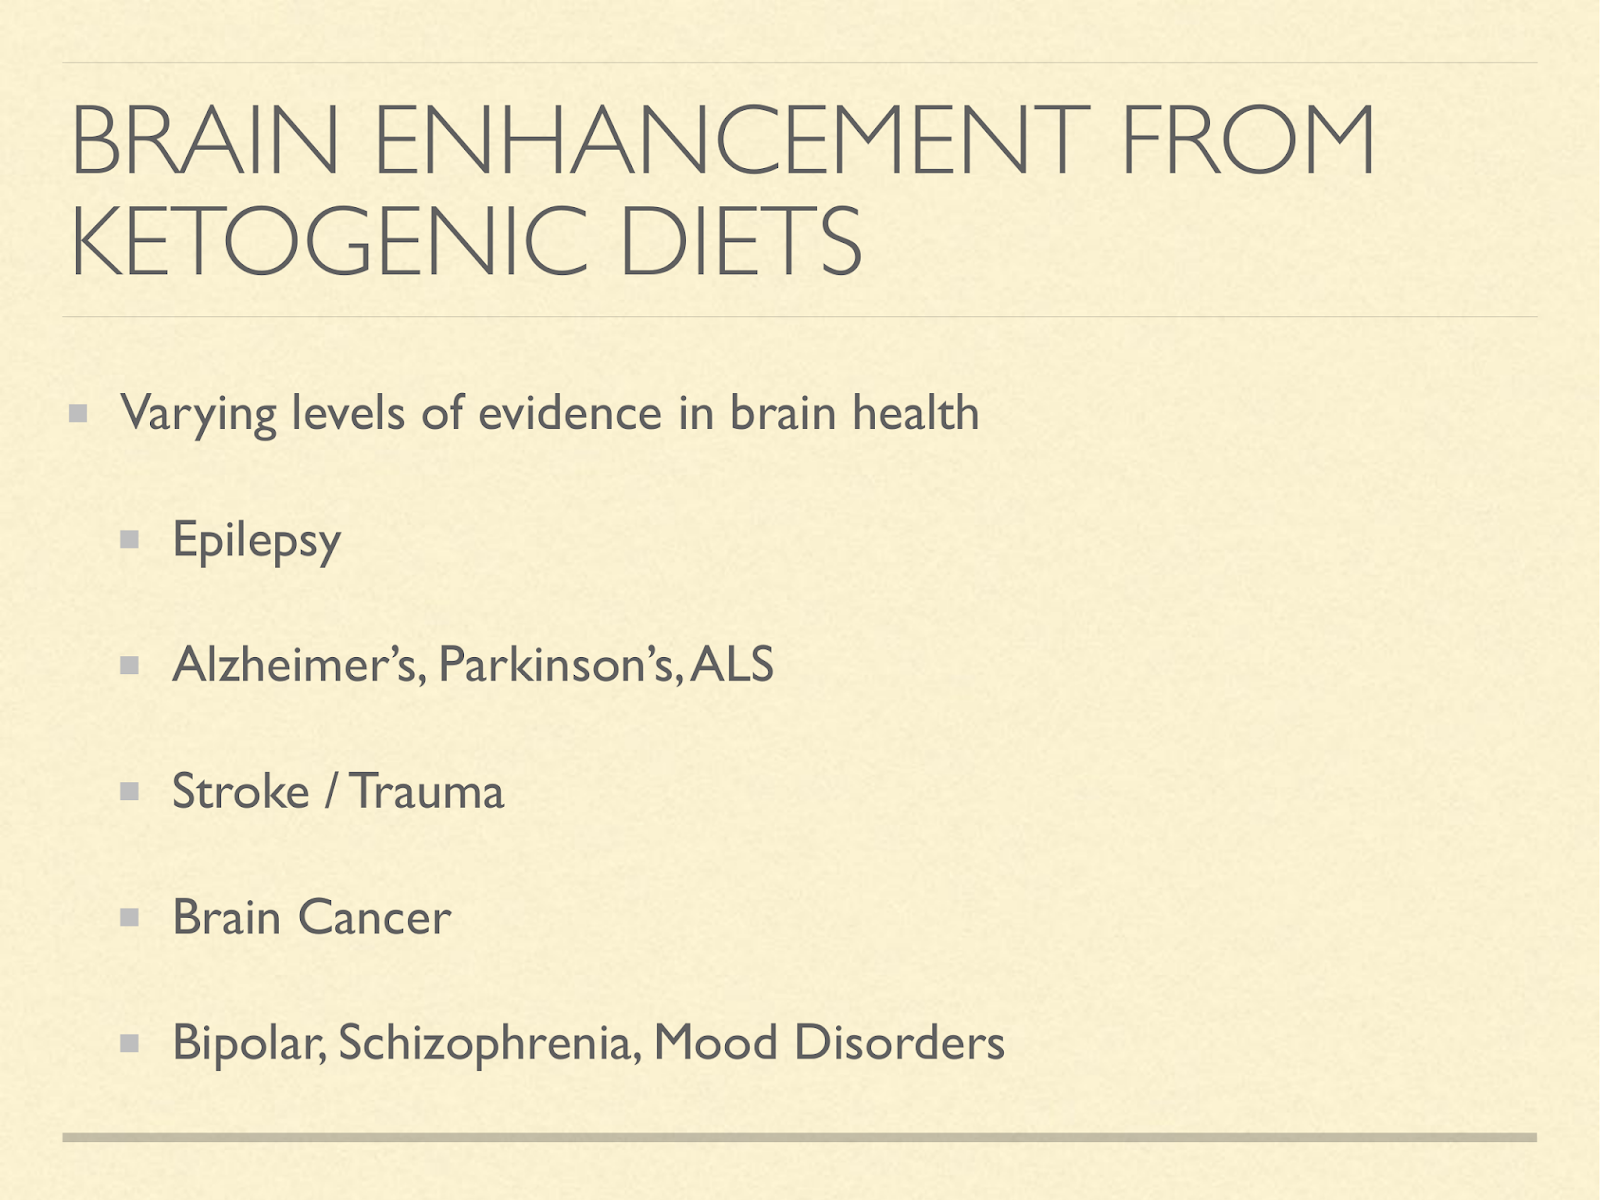 ketogenic diets and brains